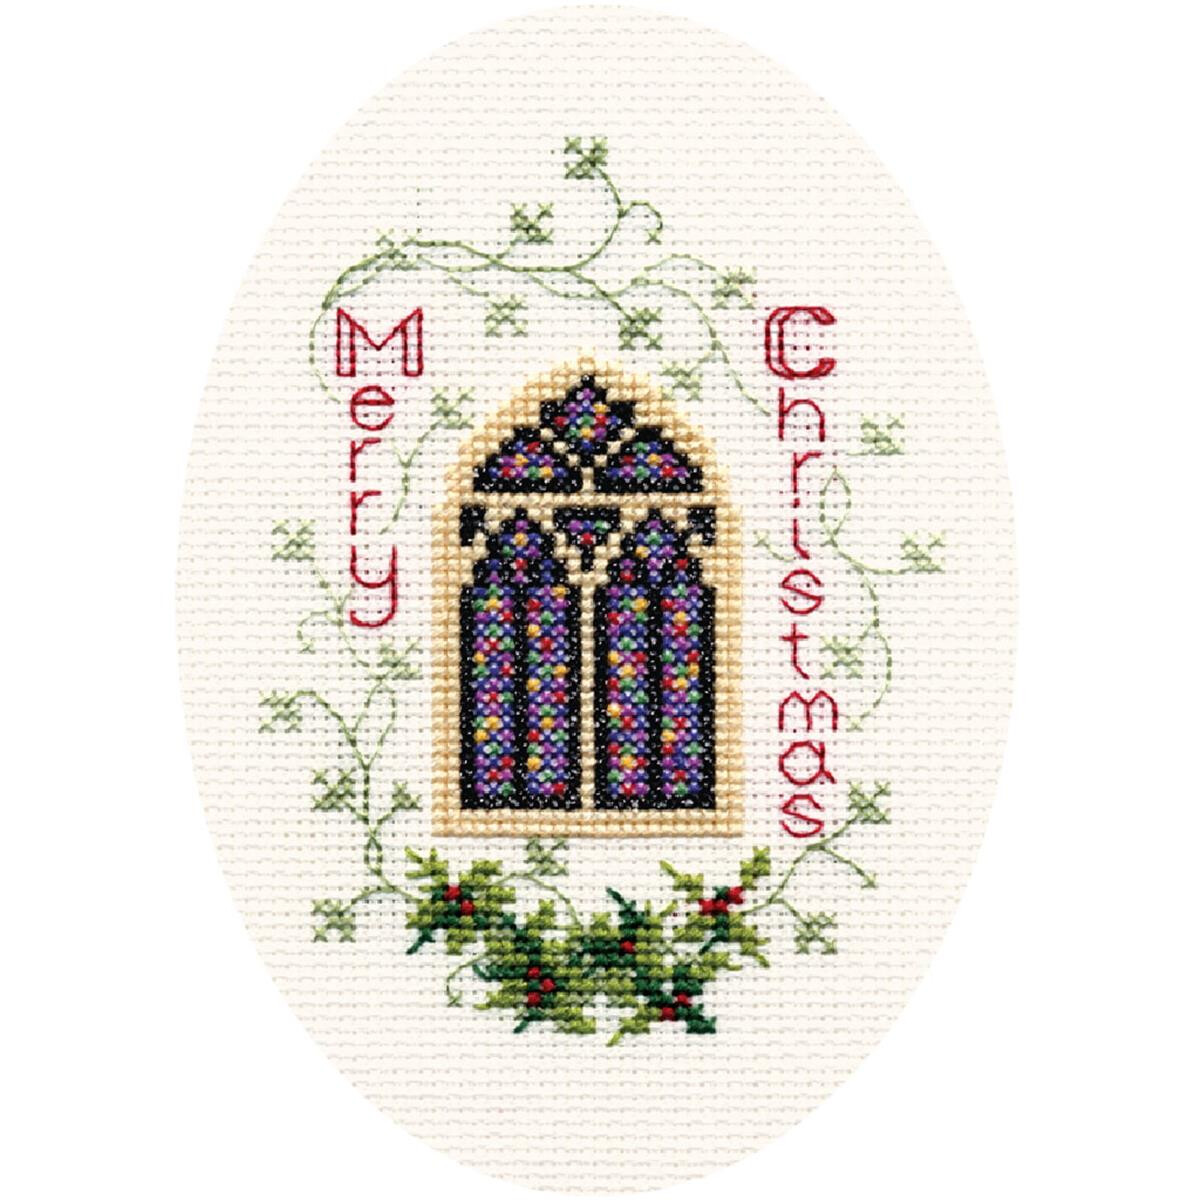 A cross stitch design from Bothy Threads embroidery pack...